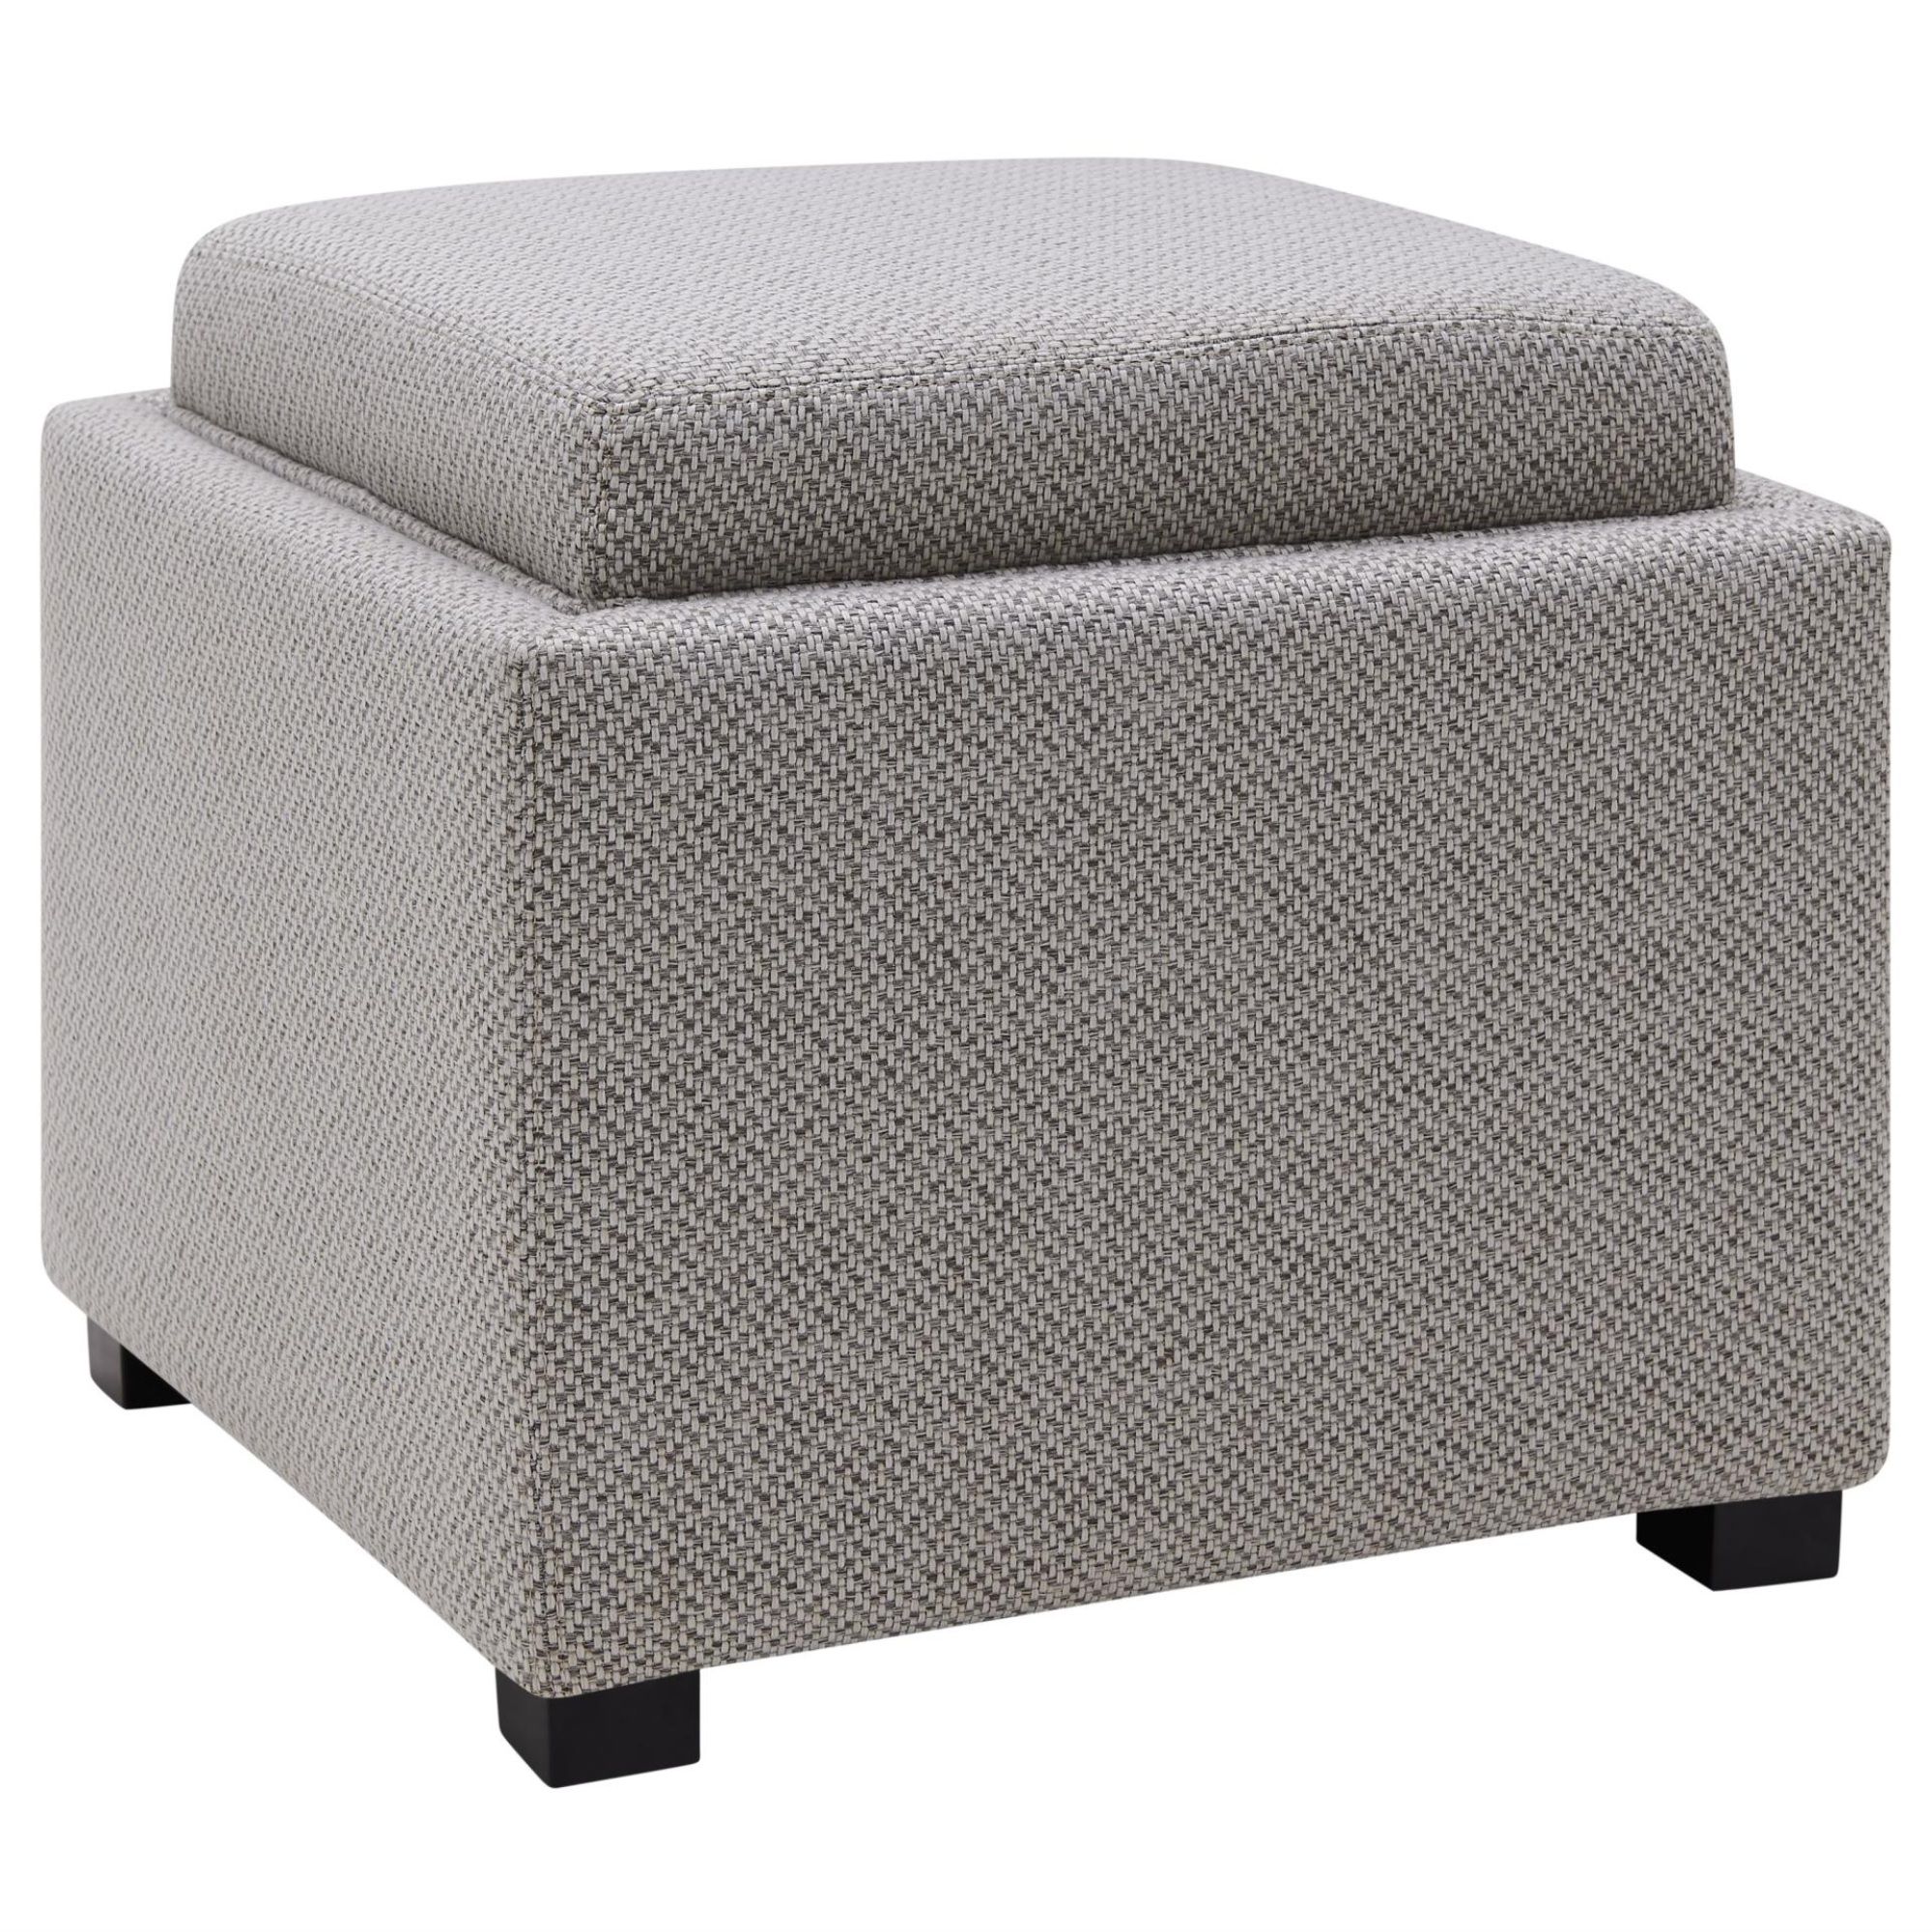 Preferred Cameron Square Fabric Storage Ottoman With Tray – Cardiff Gray Inside Gray Velvet Ottomans With Ample Storage (View 5 of 10)